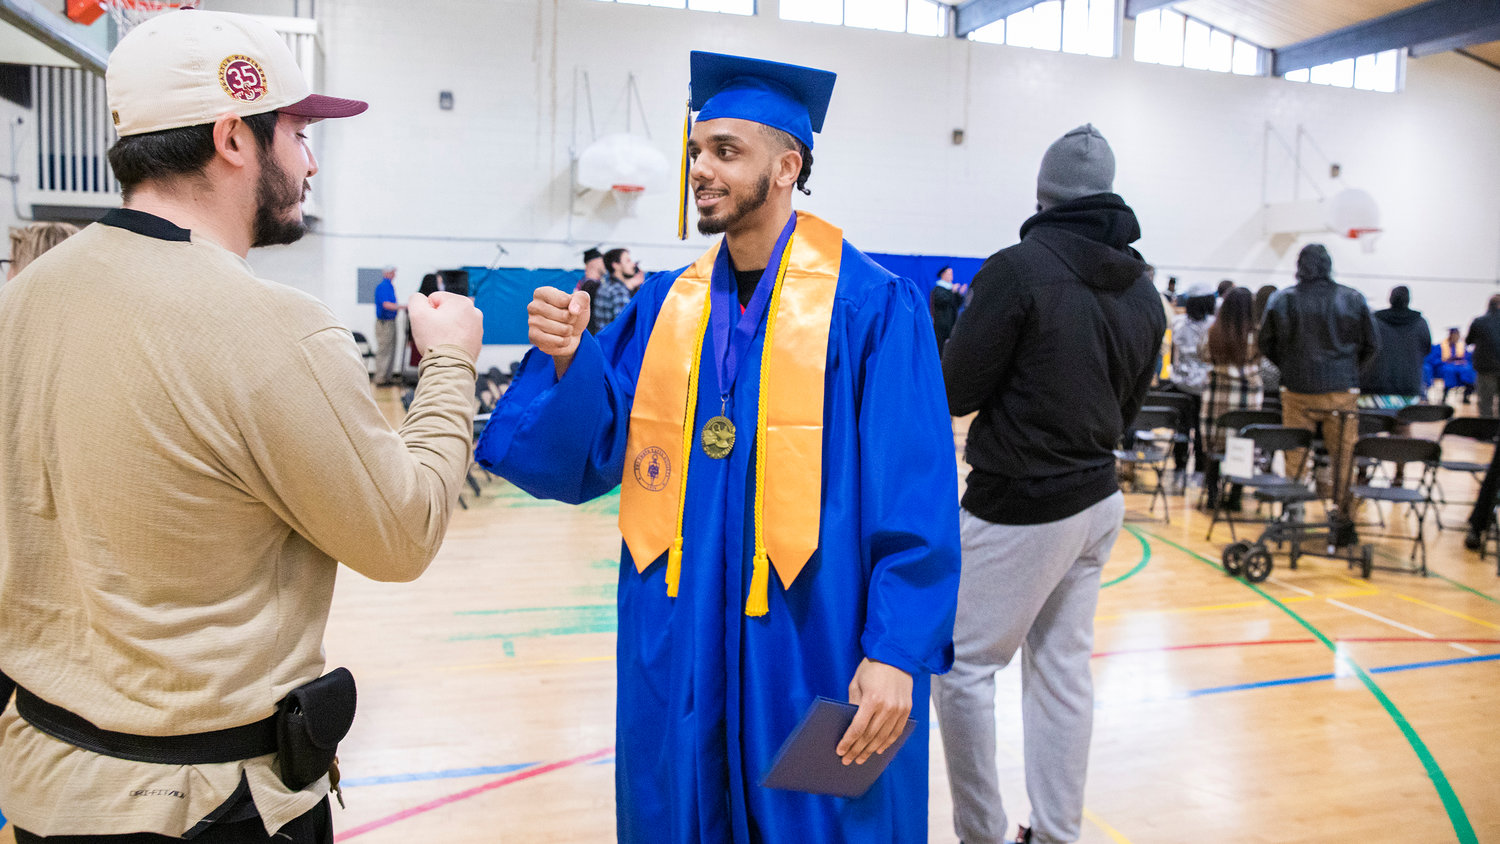 Rodney Strickland smiles and receives fist-bumps after getting his diploma on stage during a graduation ceremony for Centralia College graduates held at the Green Hill School on Wednesday in Chehalis.